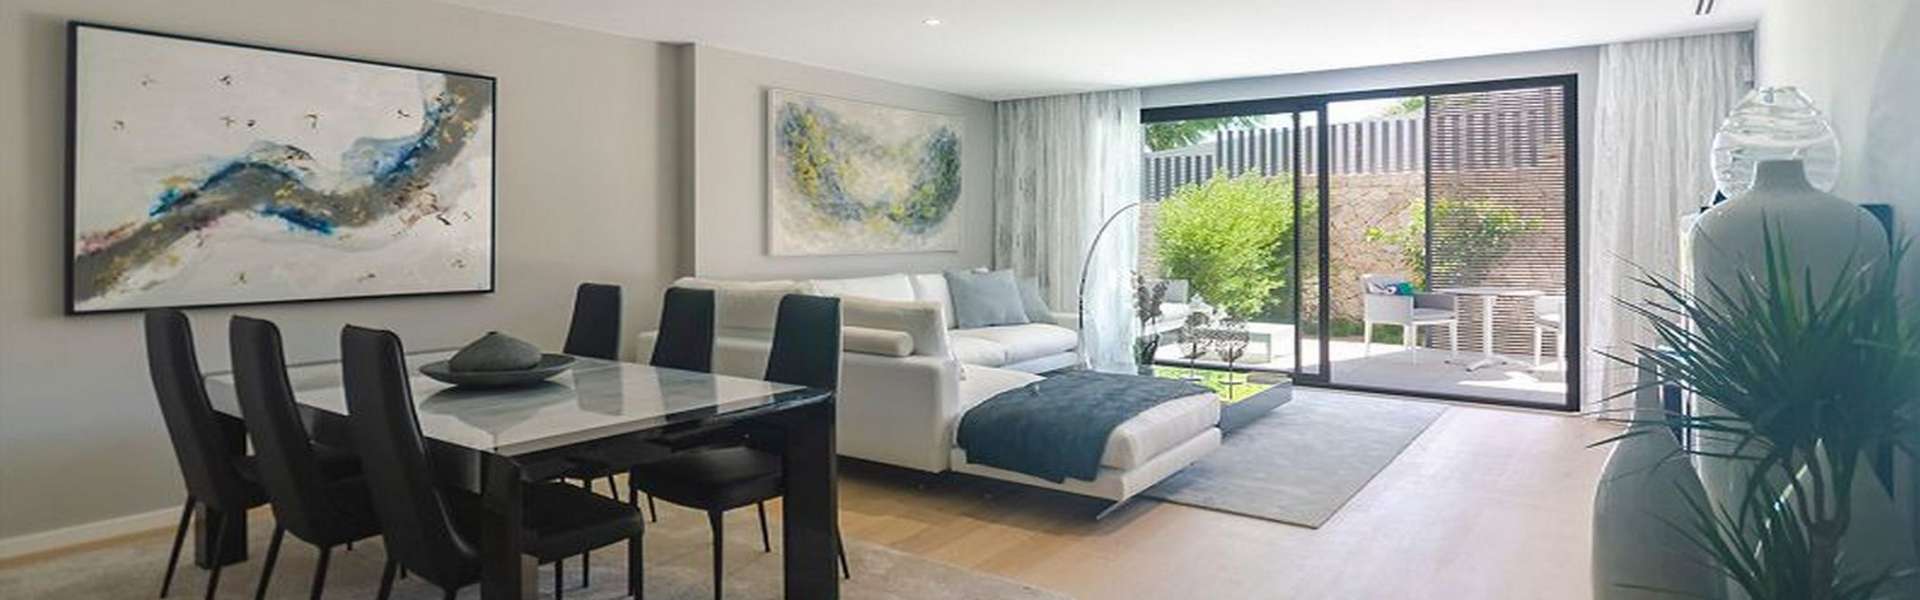 Palma/Golf Course Son Quint - Modern apartments/penthouses in beautiful location